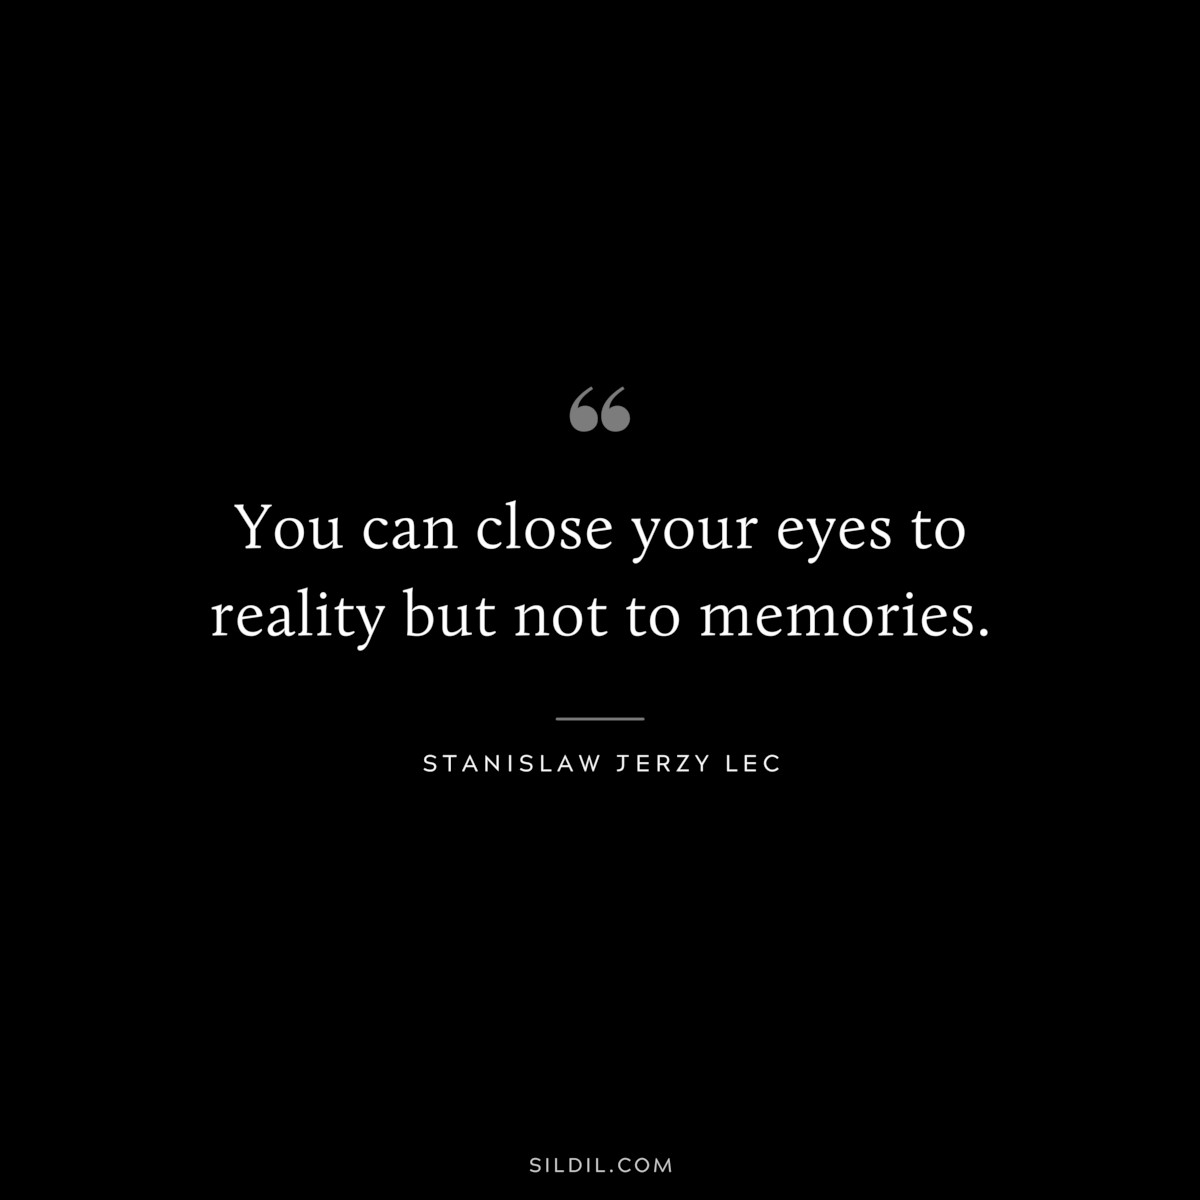 You can close your eyes to reality but not to memories. ― Stanislaw Jerzy Lec